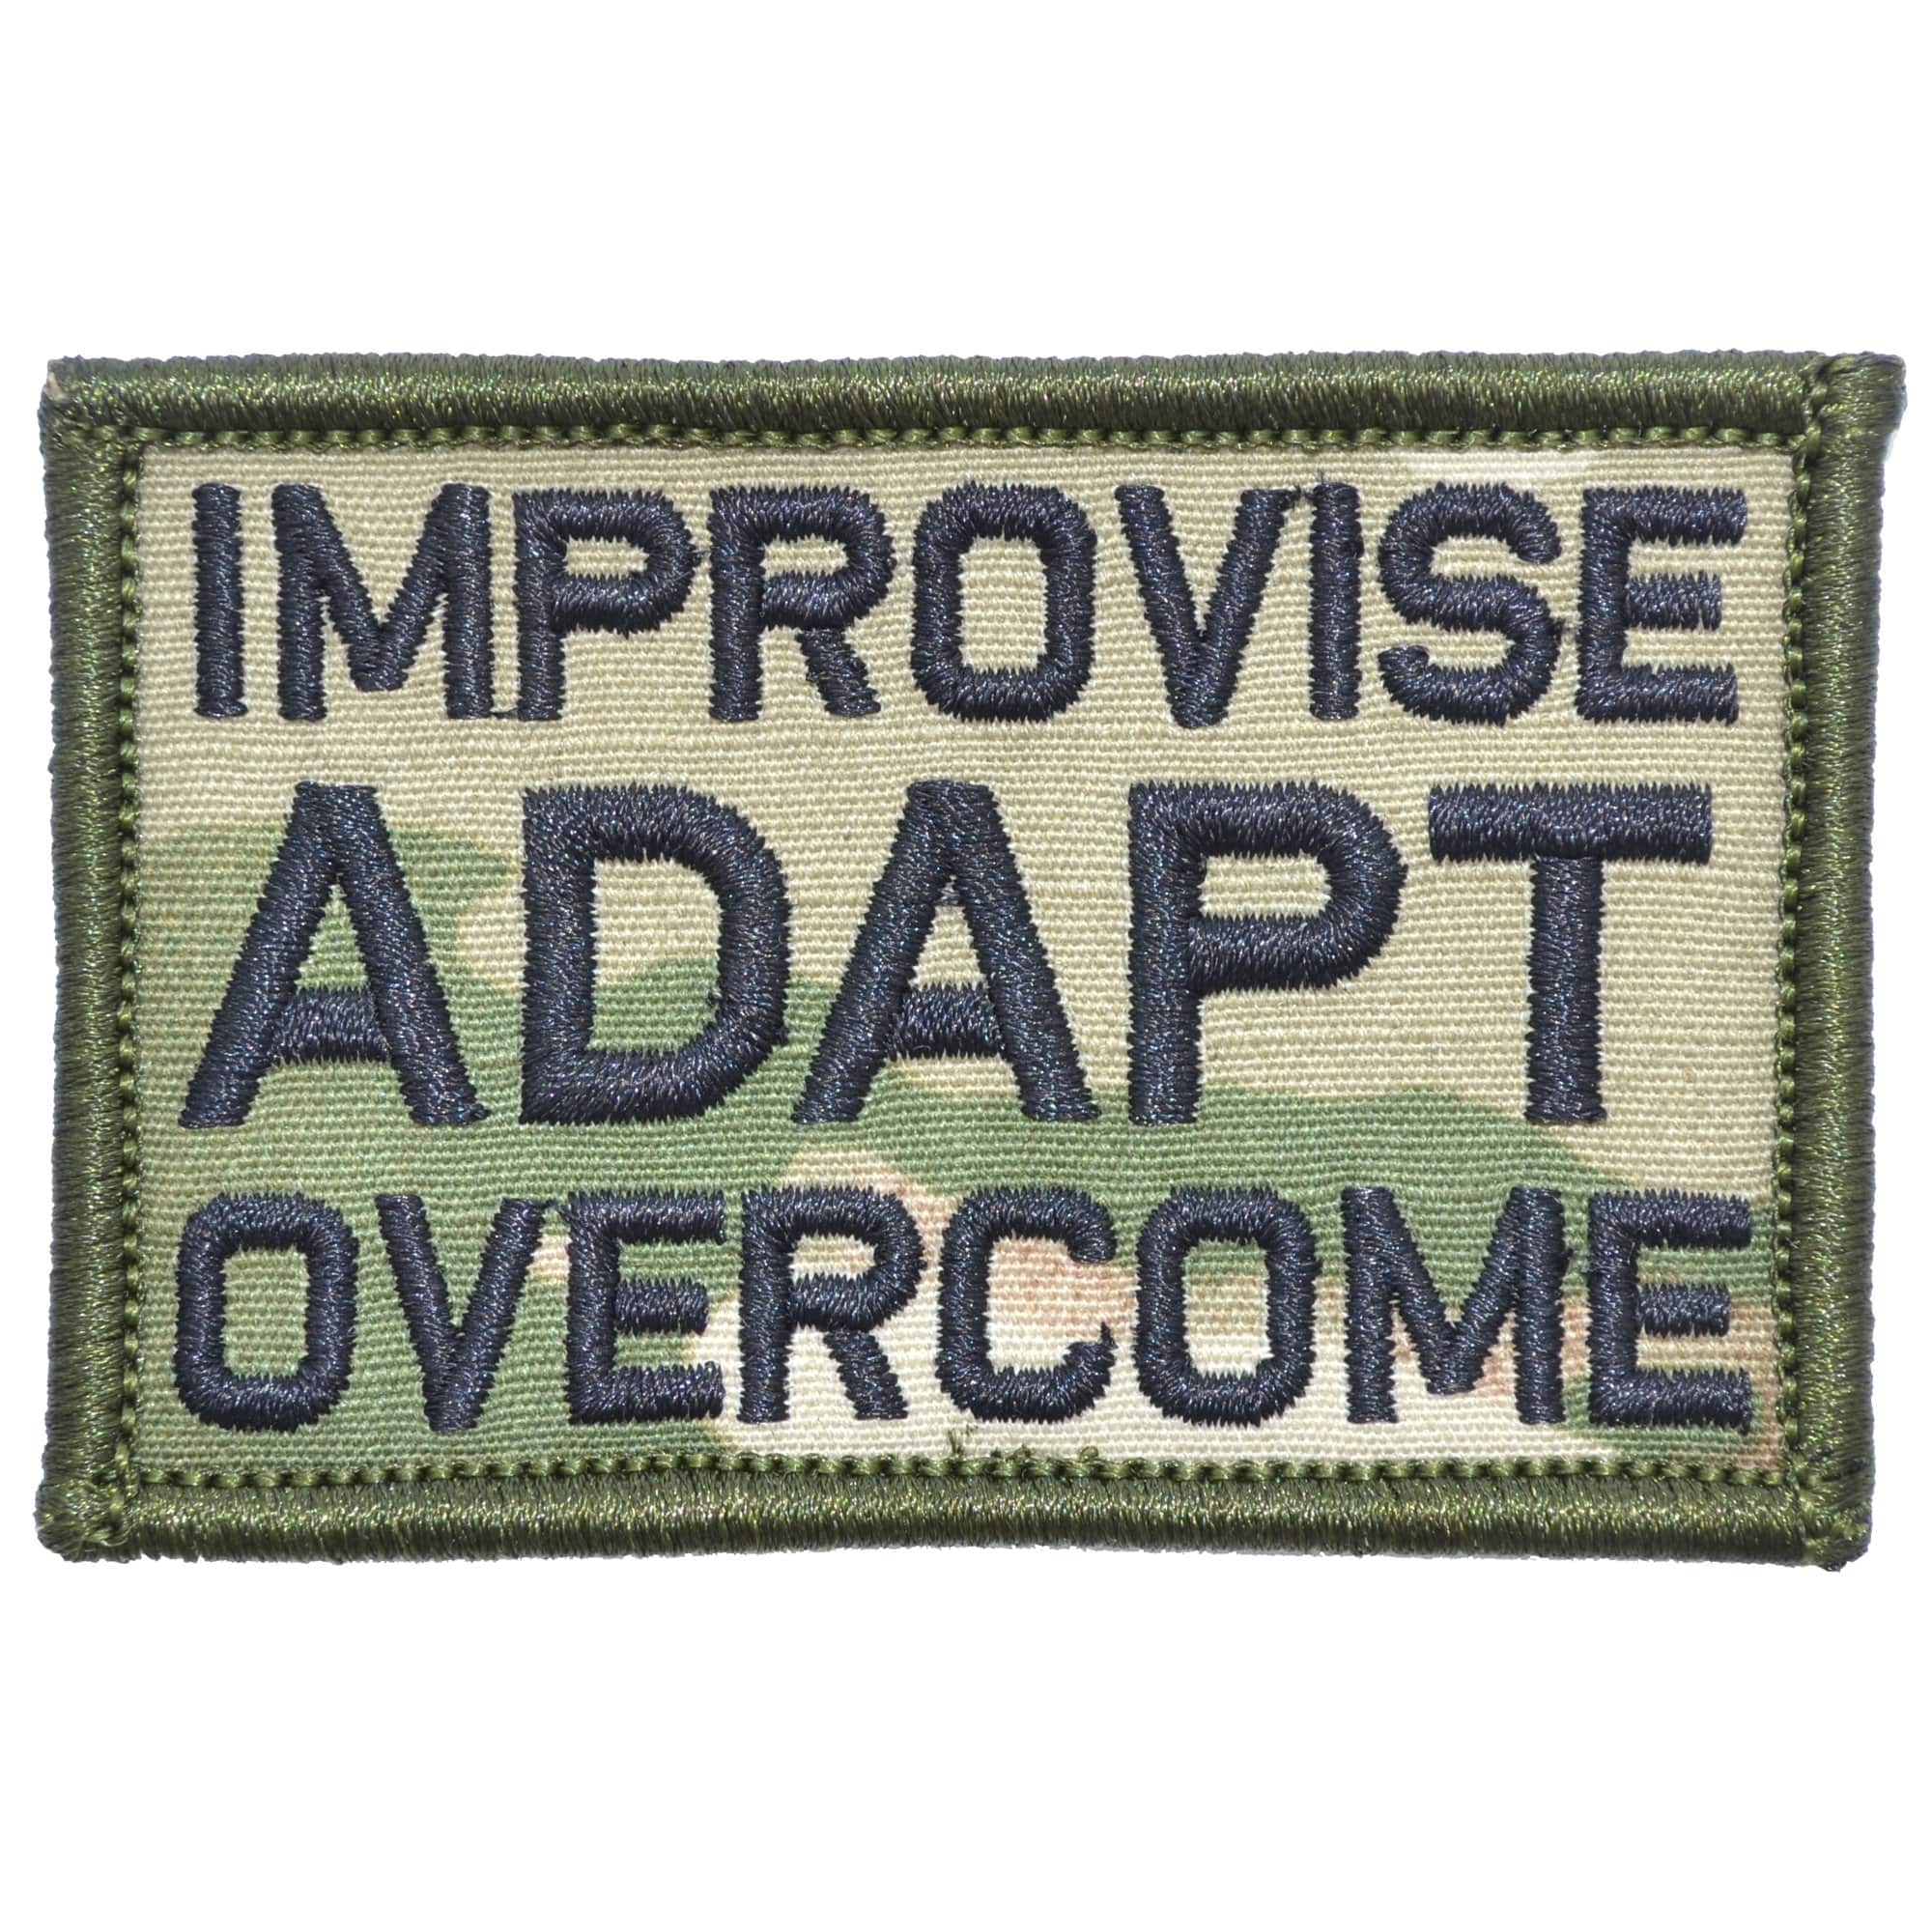 Tactical Gear Junkie Patches MultiCam Improvise Adapt Overcome - 2x3 Patch